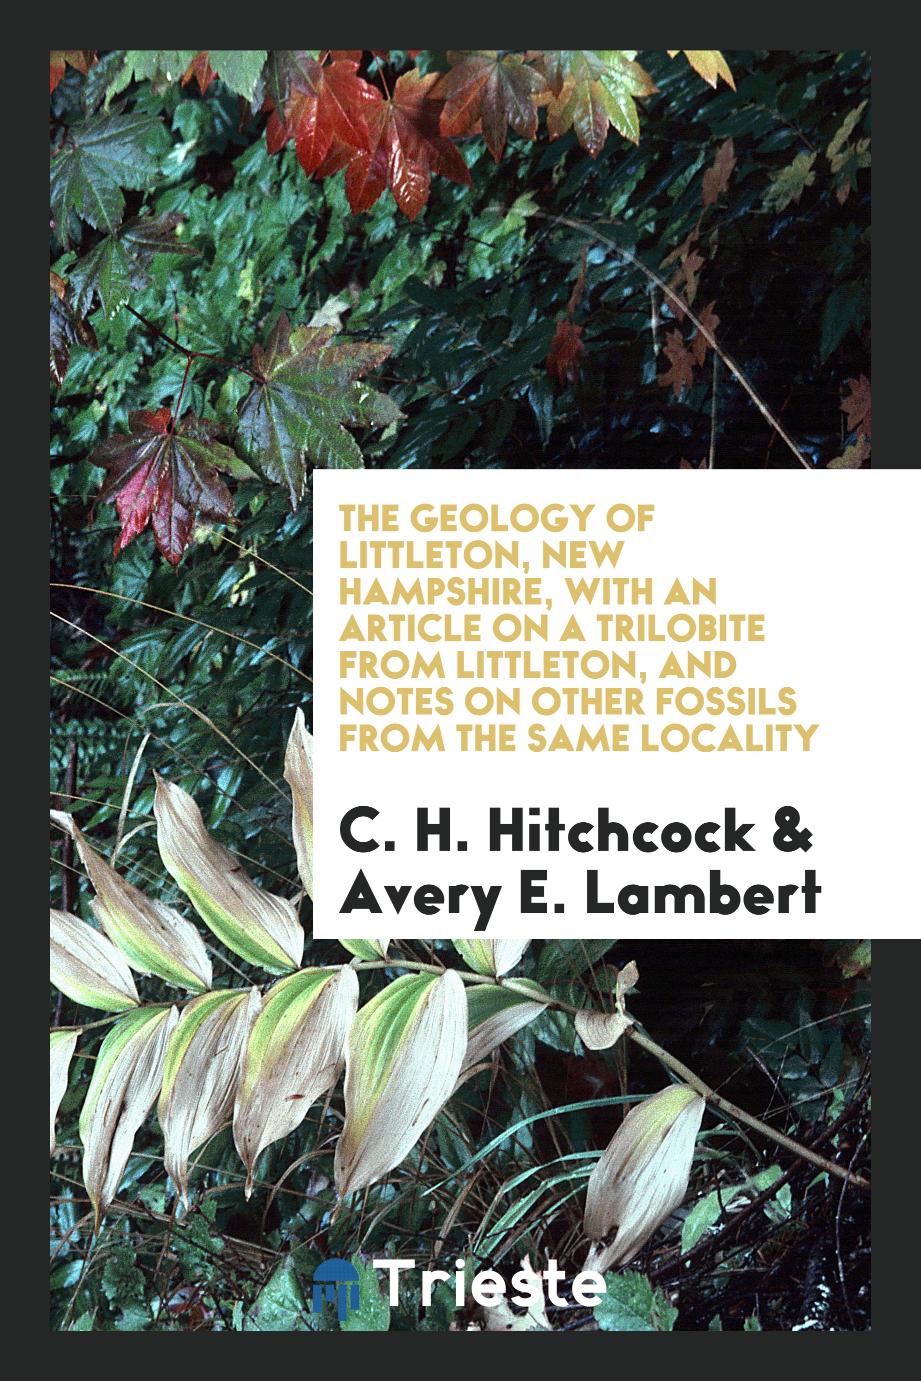 The Geology of Littleton, New Hampshire, with an Article on a Trilobite from Littleton, and Notes on Other Fossils from the Same Locality